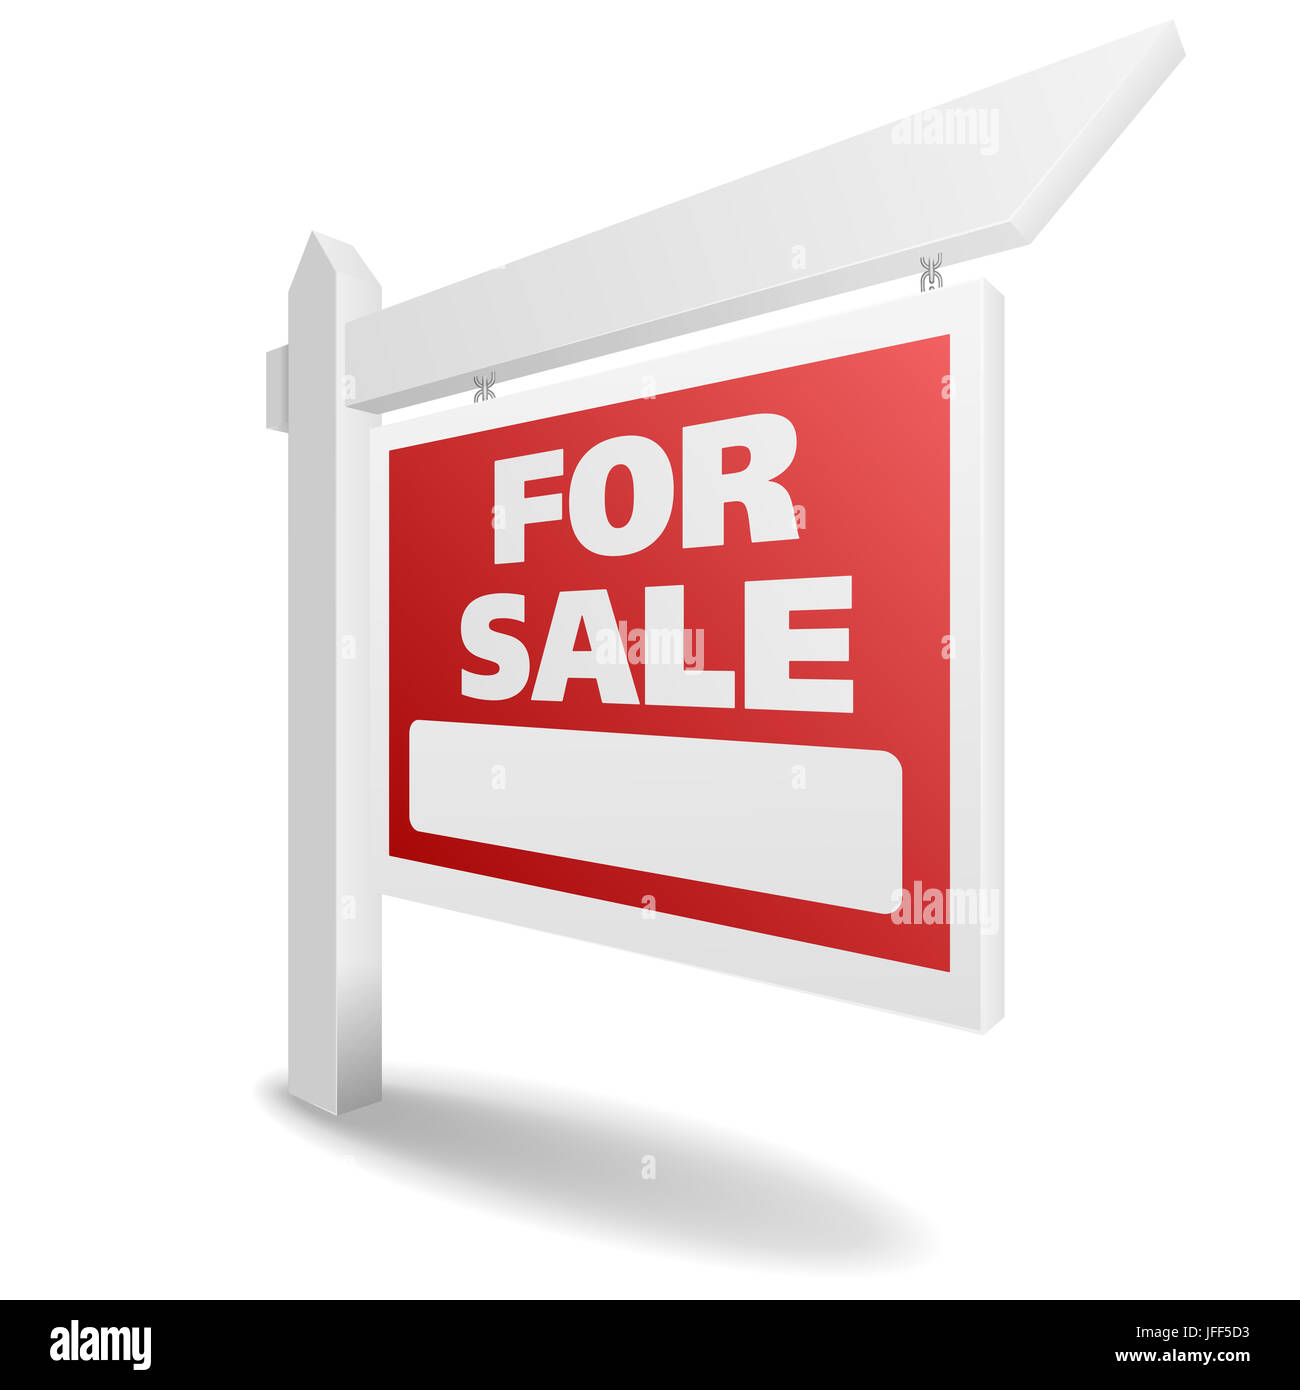 Real Estate For Sale Stock Photo